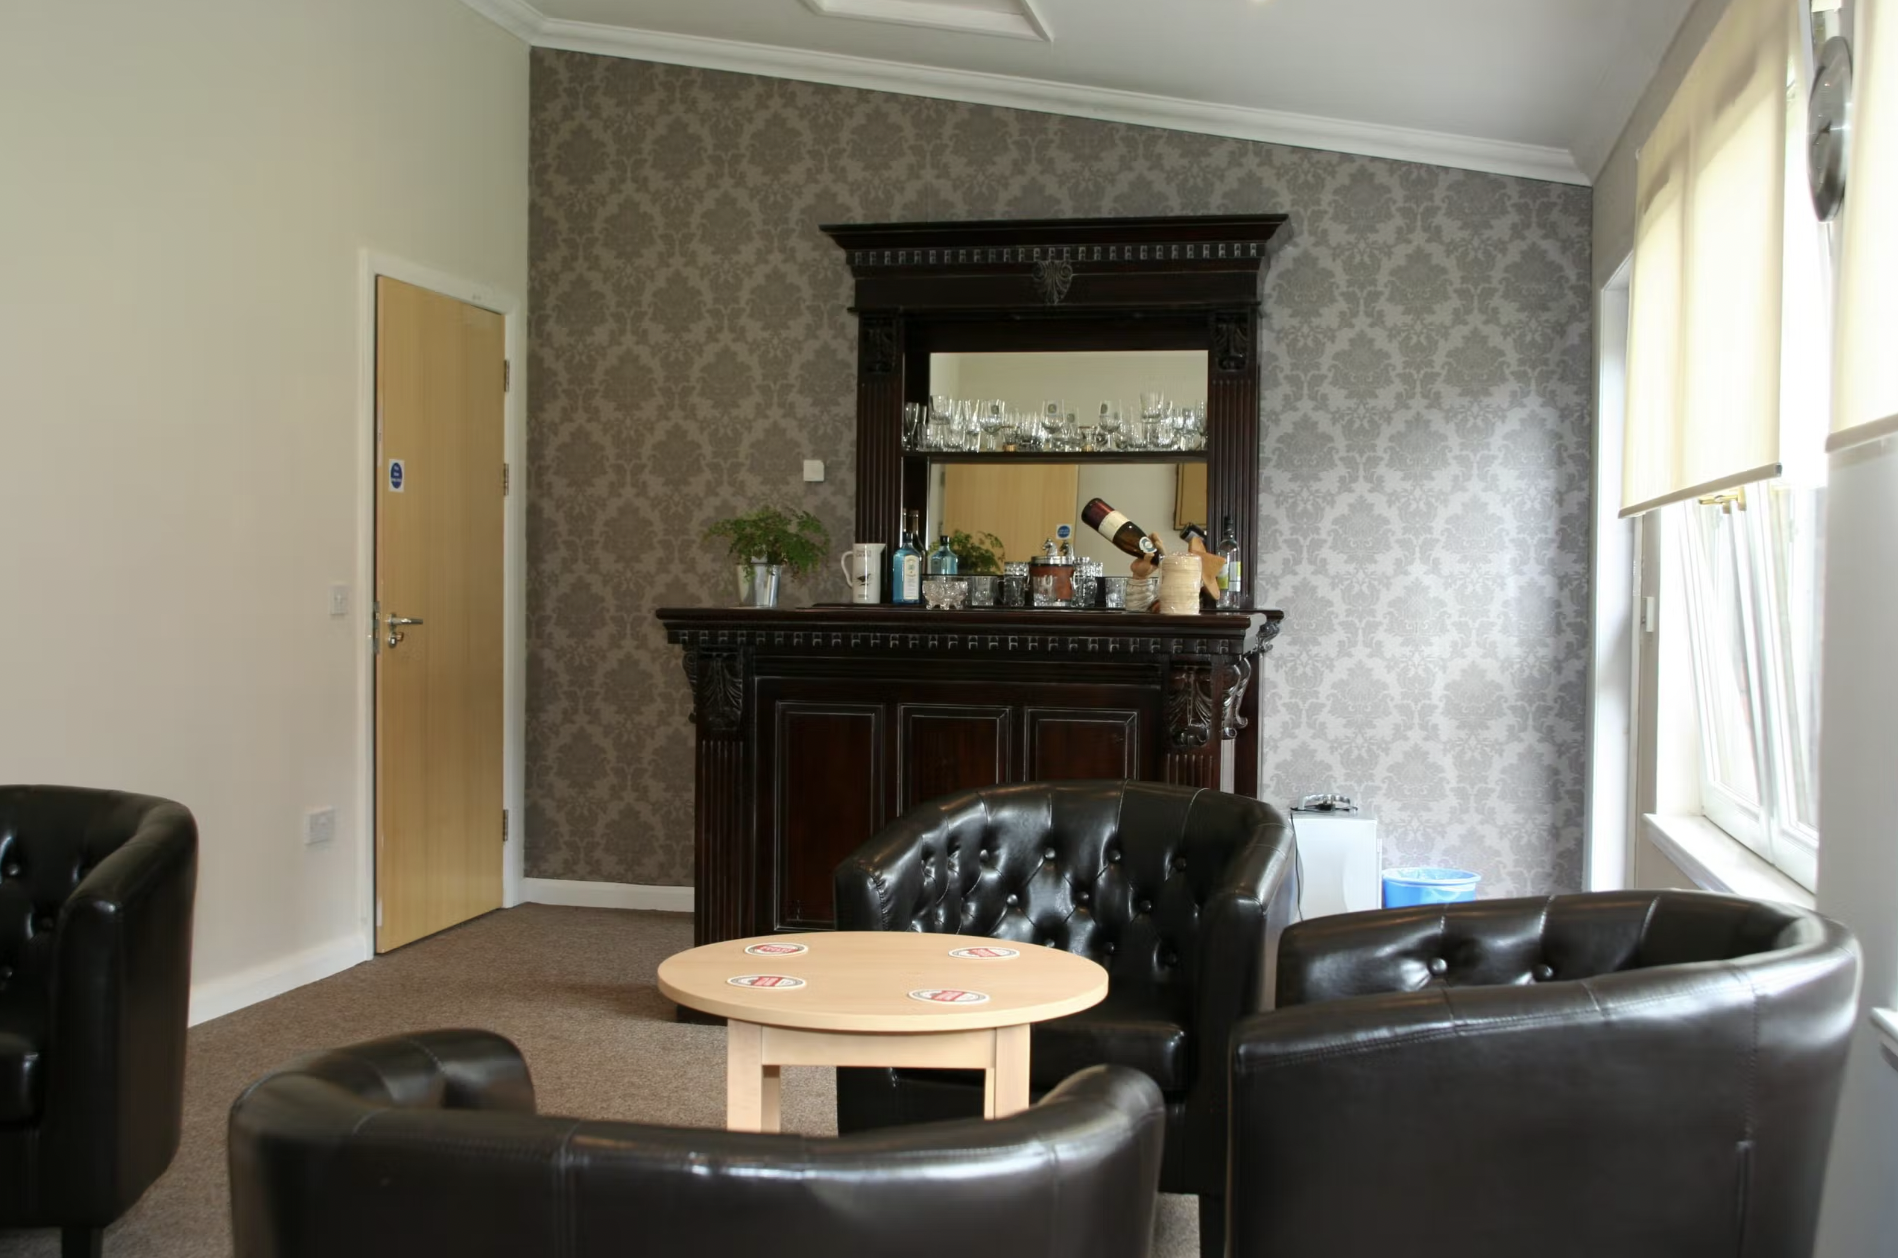 Independent Care Home - Beechgrove care home 6